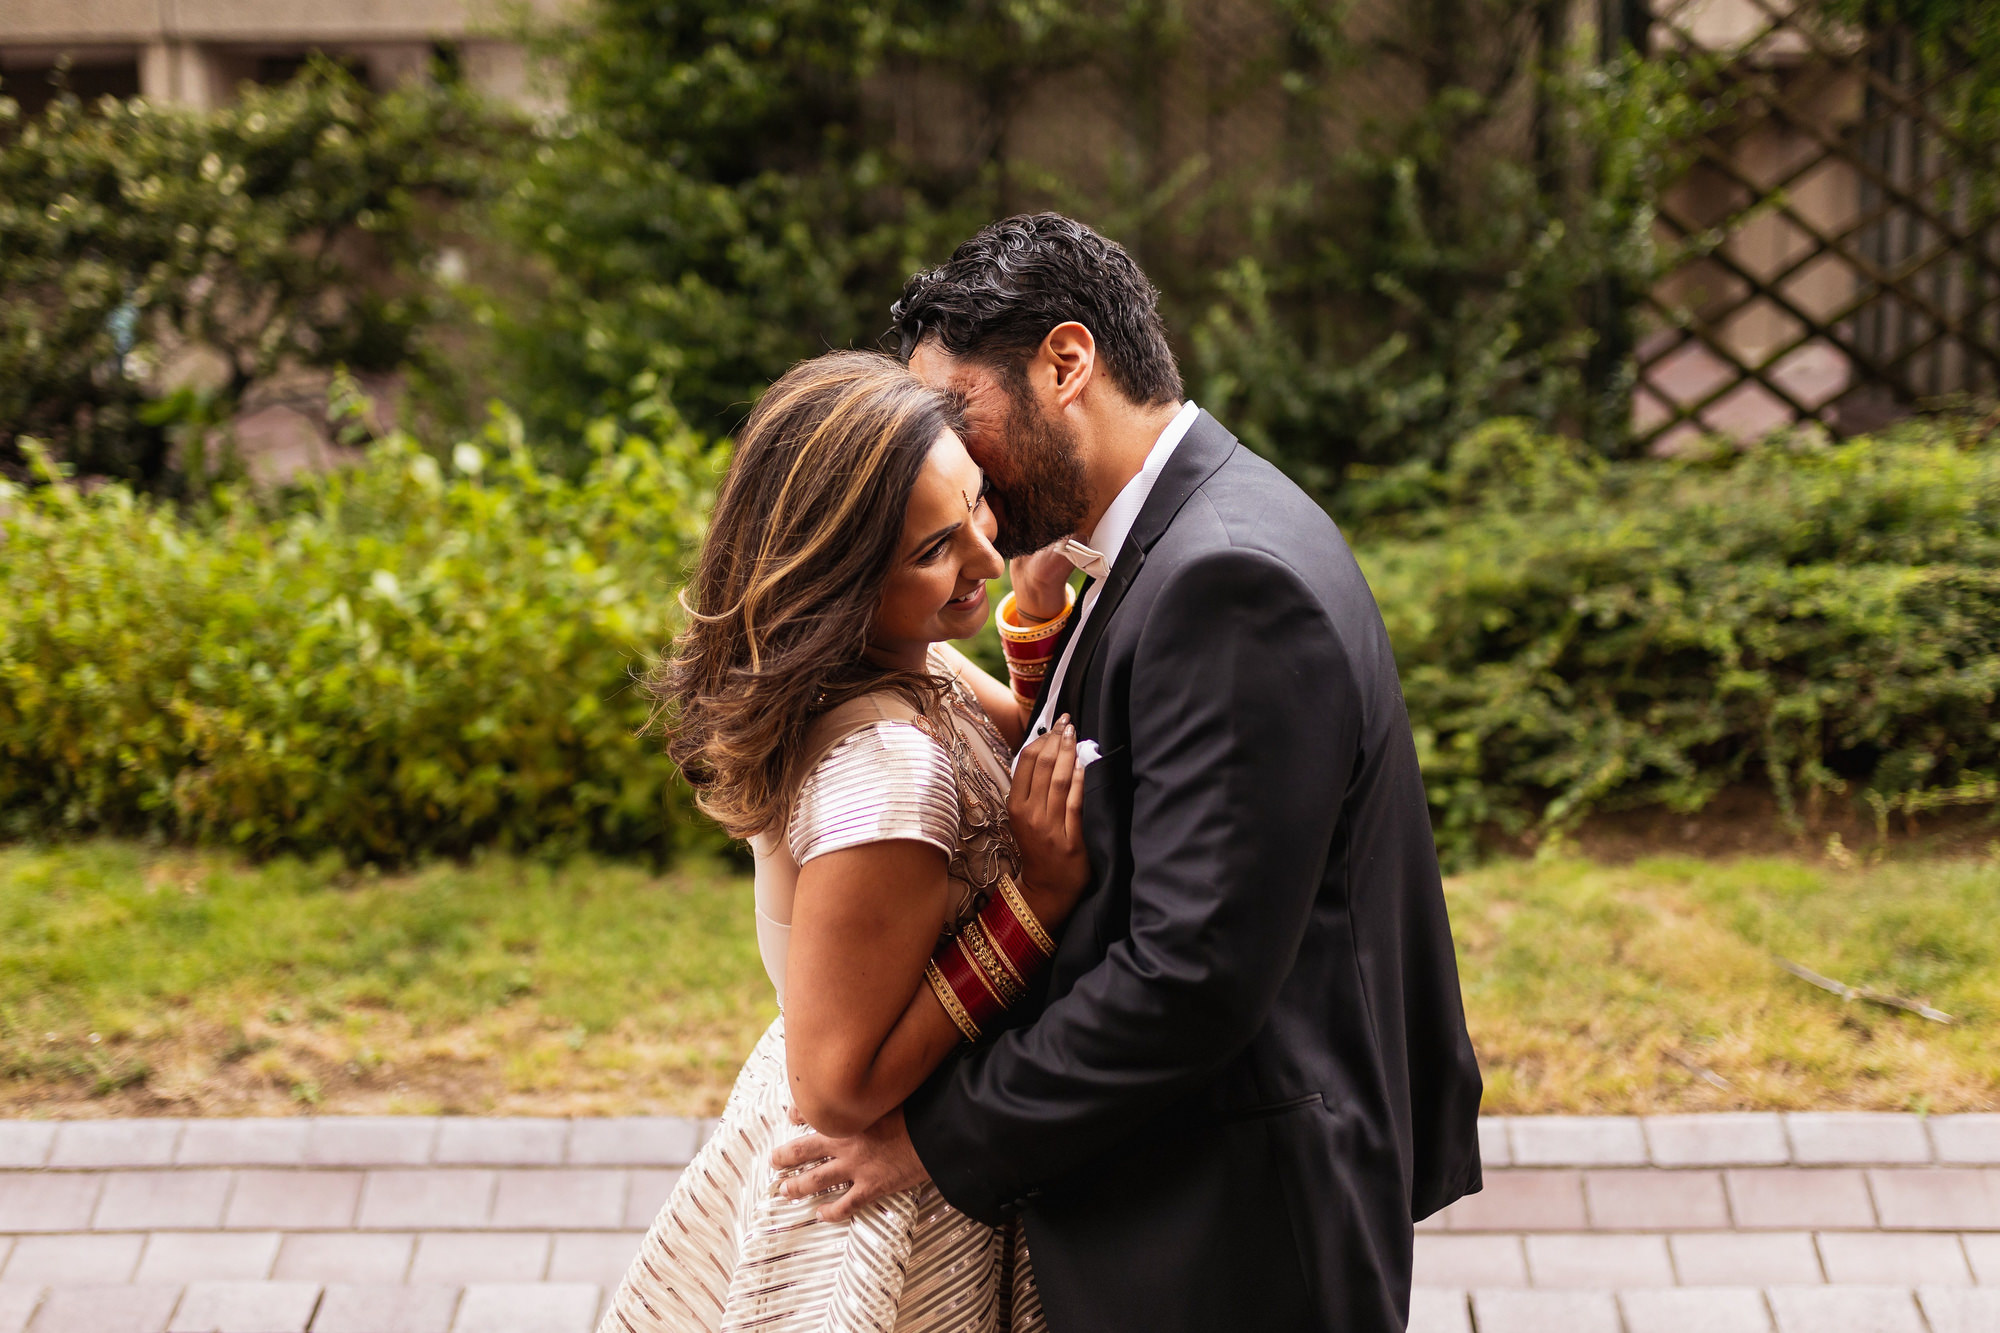 The Brewery, Barbican Estate, London, Asian Wedding Photographer, couples portraits